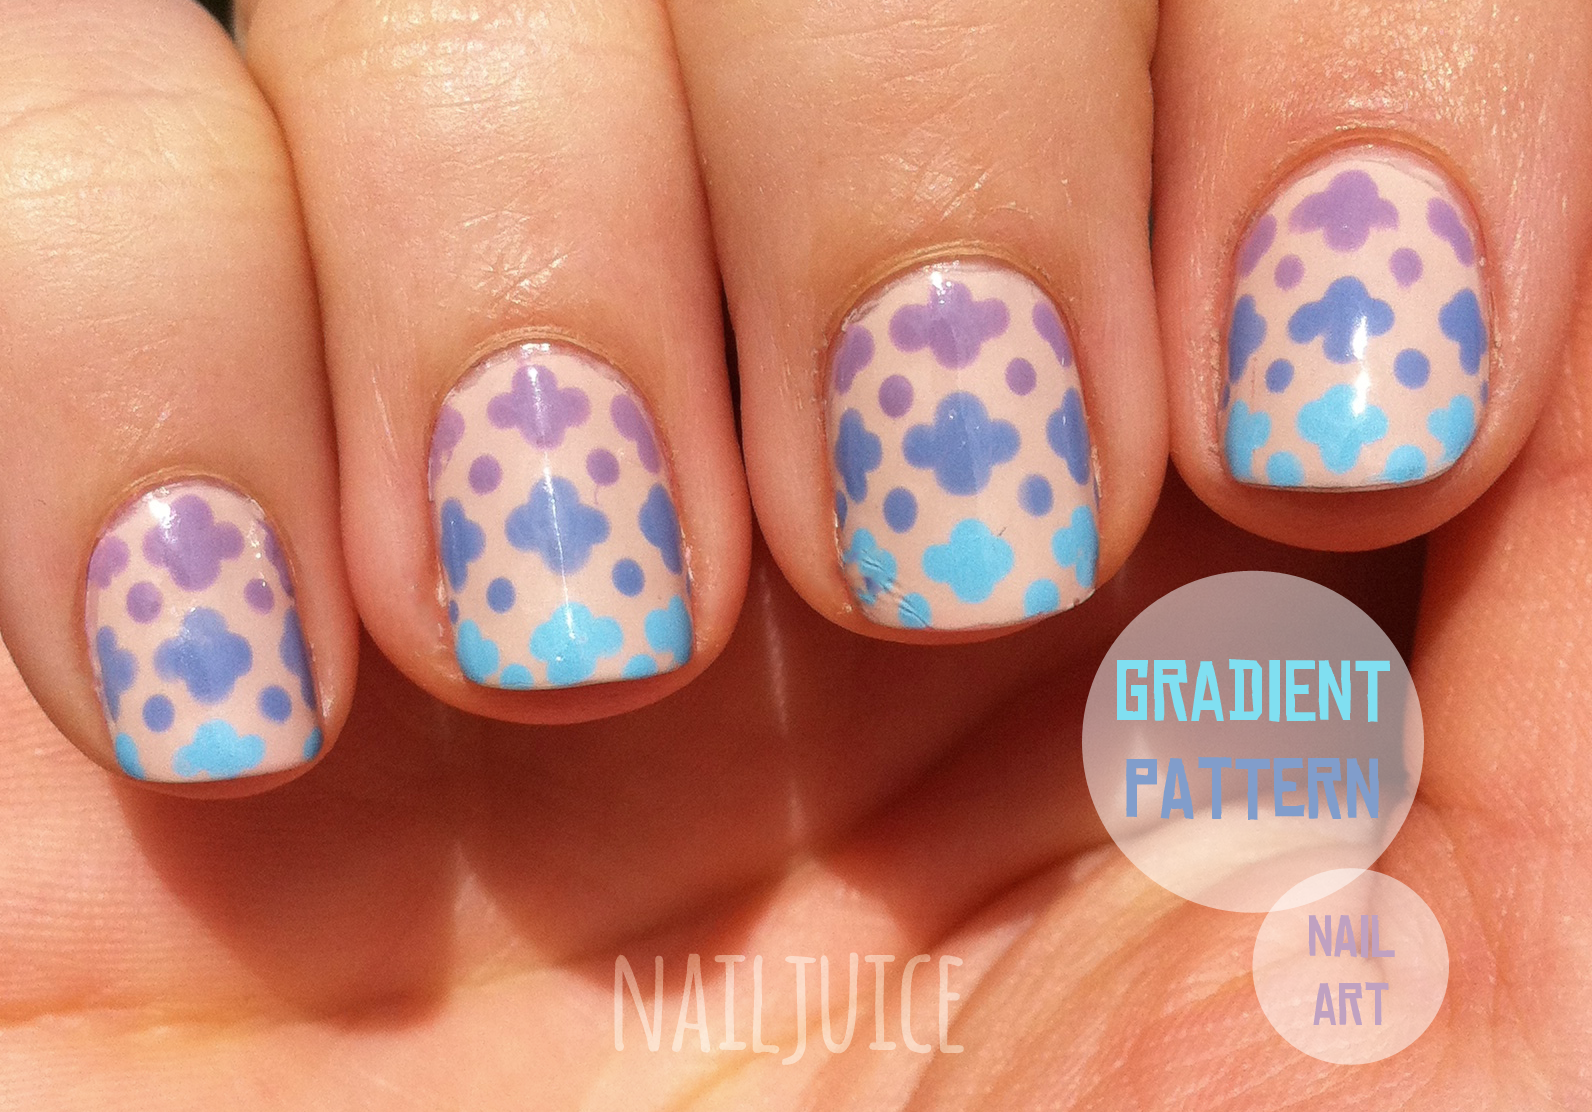 6. "Colorful Gradient Nail Art Tutorial" - wide 7